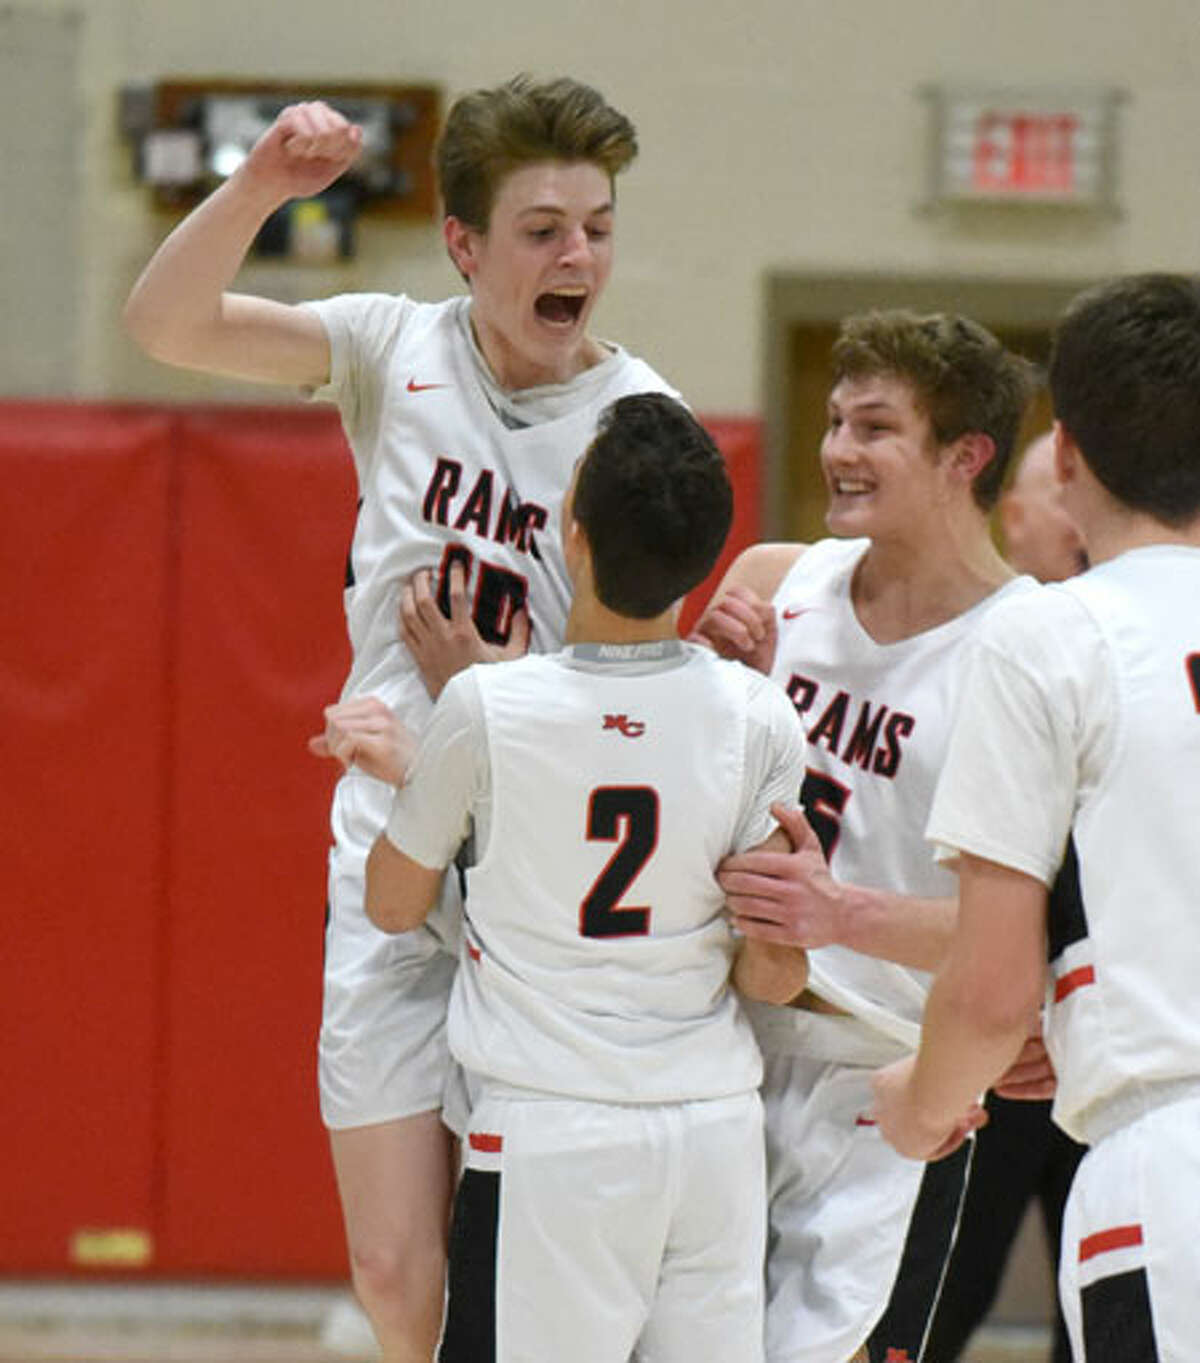 Ryan McAleer (10) and Alex Gibbens celebrate with Aaron Fishman (2) after Fishman hit three free throws to tie the score with 0.9 seconds remaining. — Dave Stewart/Hearst Connecticut Media photo